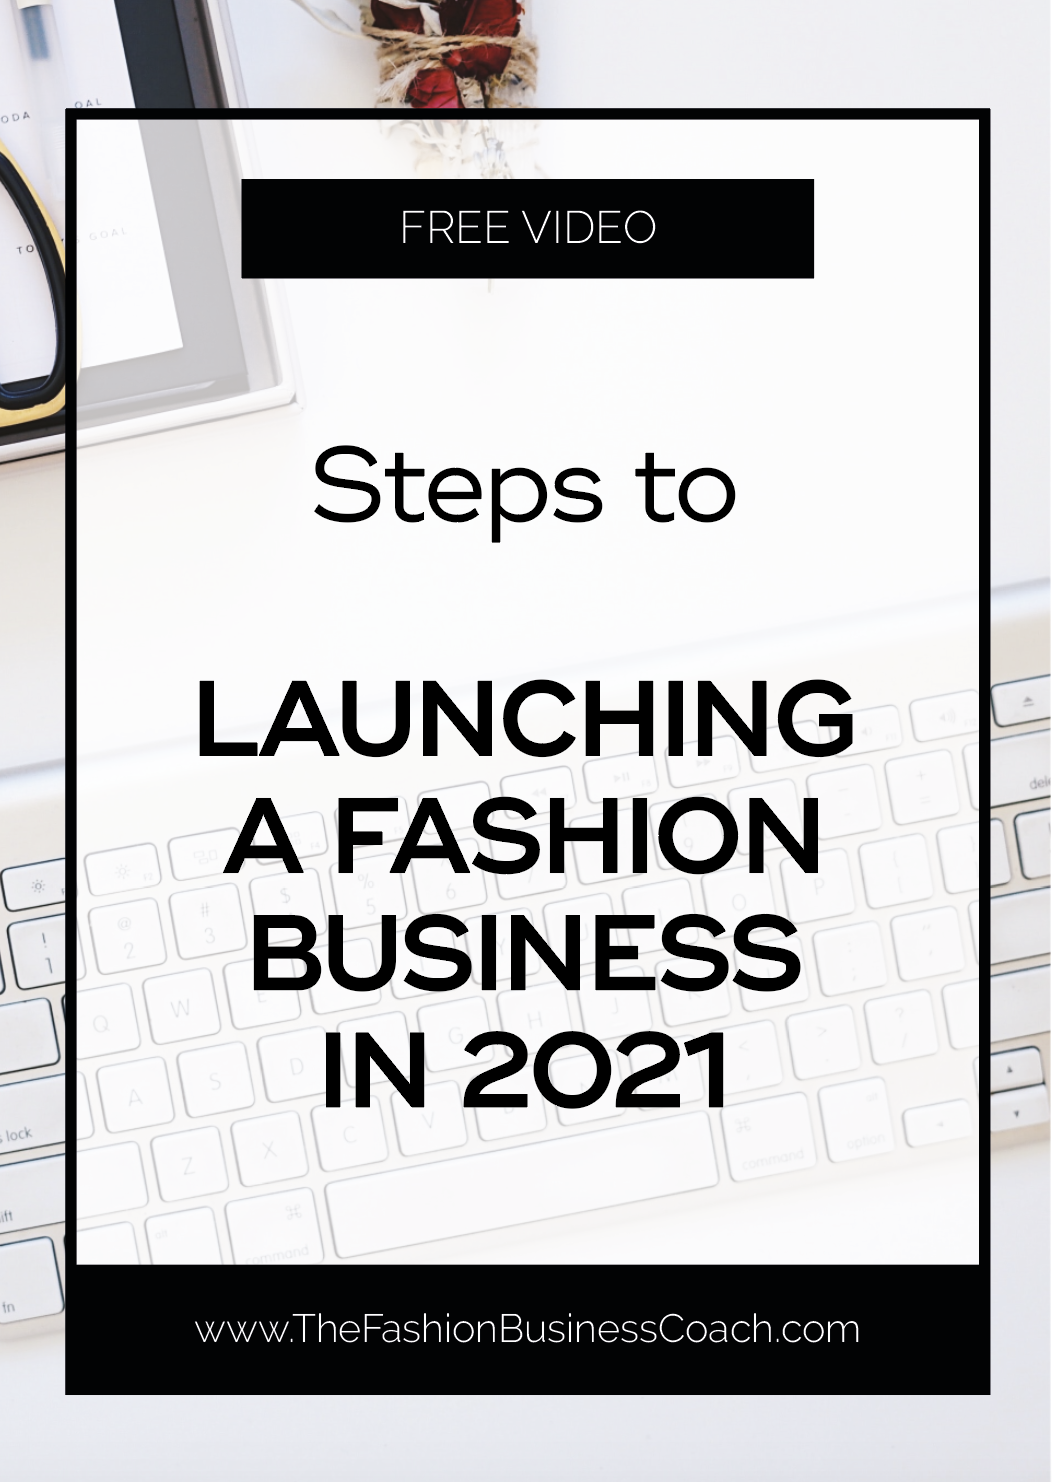 Steps to Launching Fashion Business in 2021 4.png